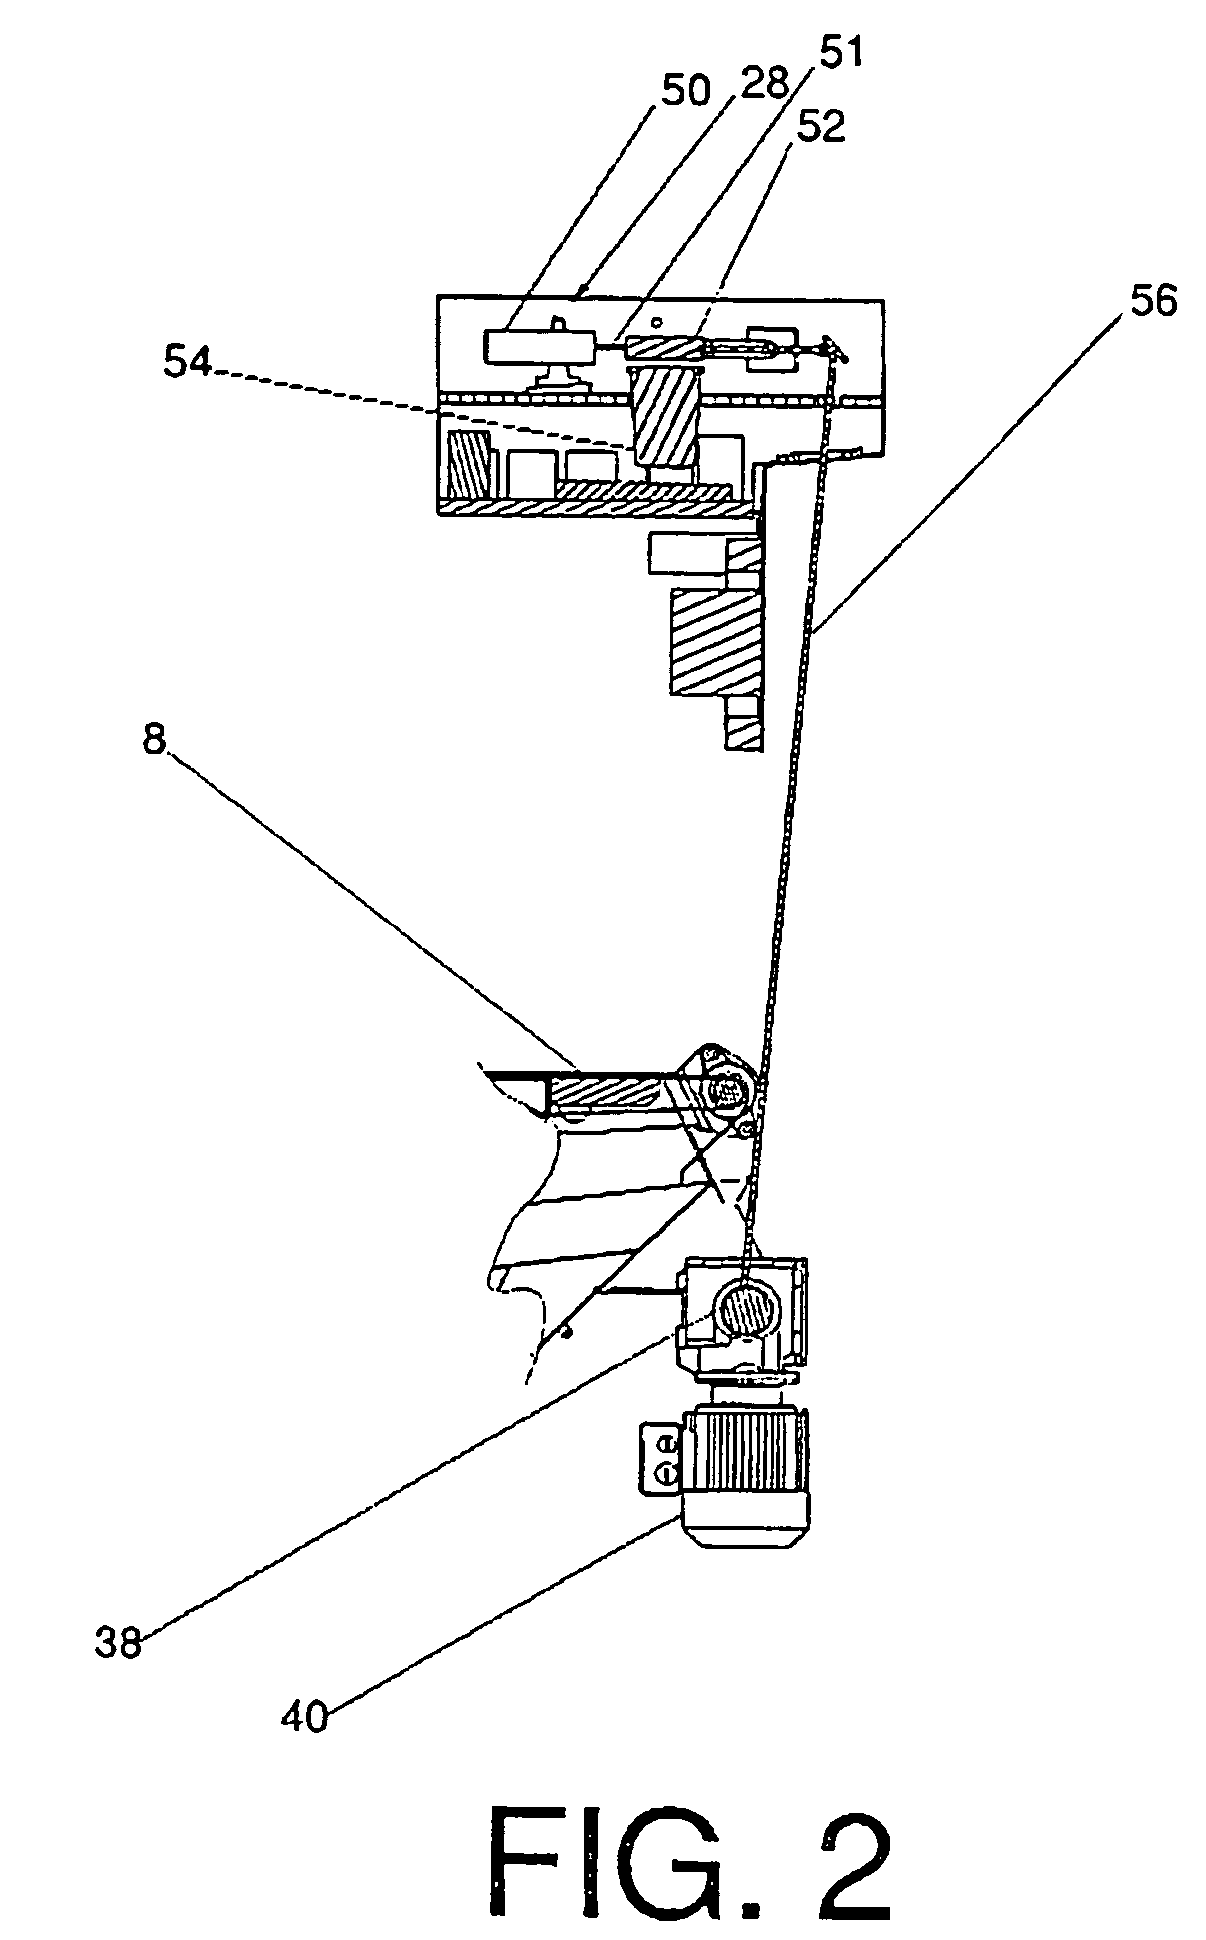 Apparatus and method for classifying and sorting articles